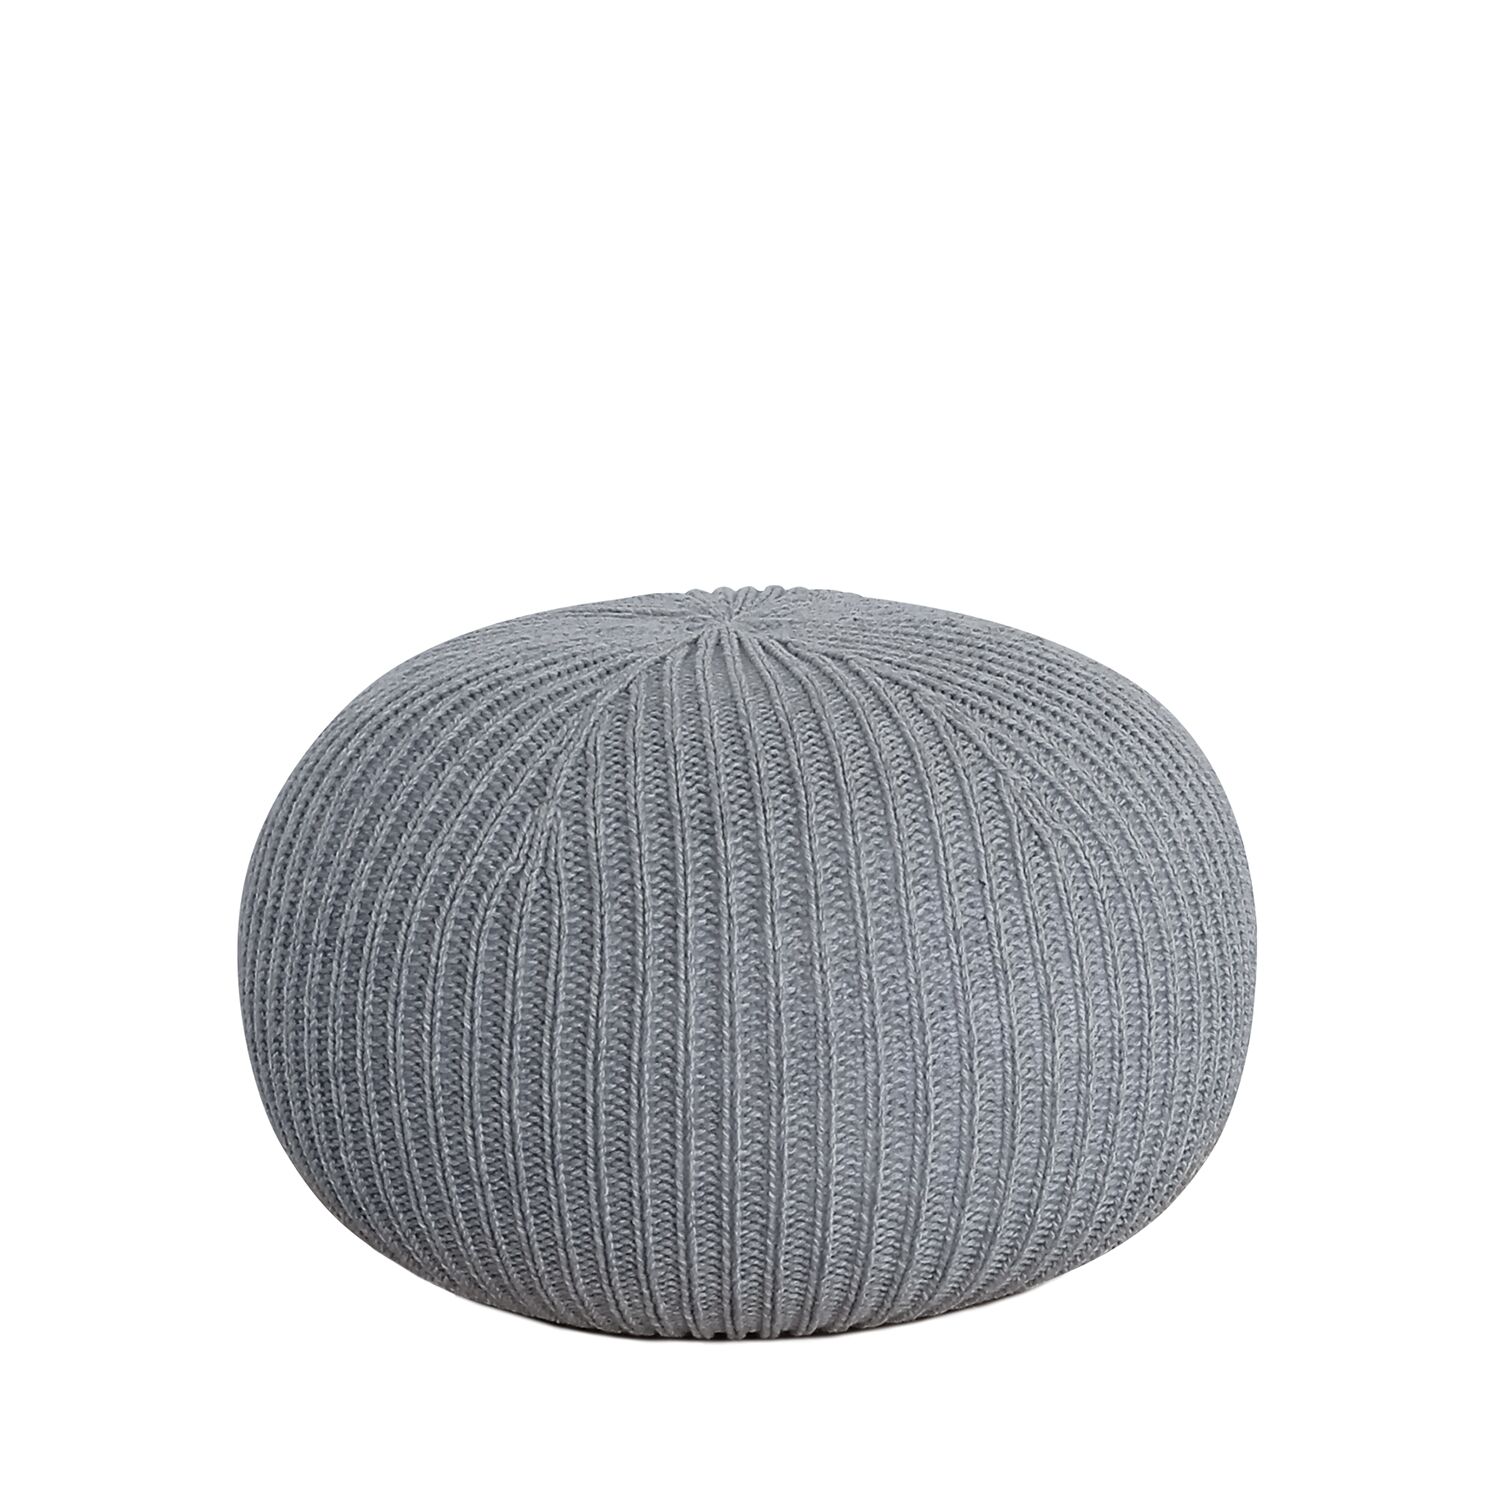 GULRU Pouf Removable Cover Gray Knitted 50x50x35cm